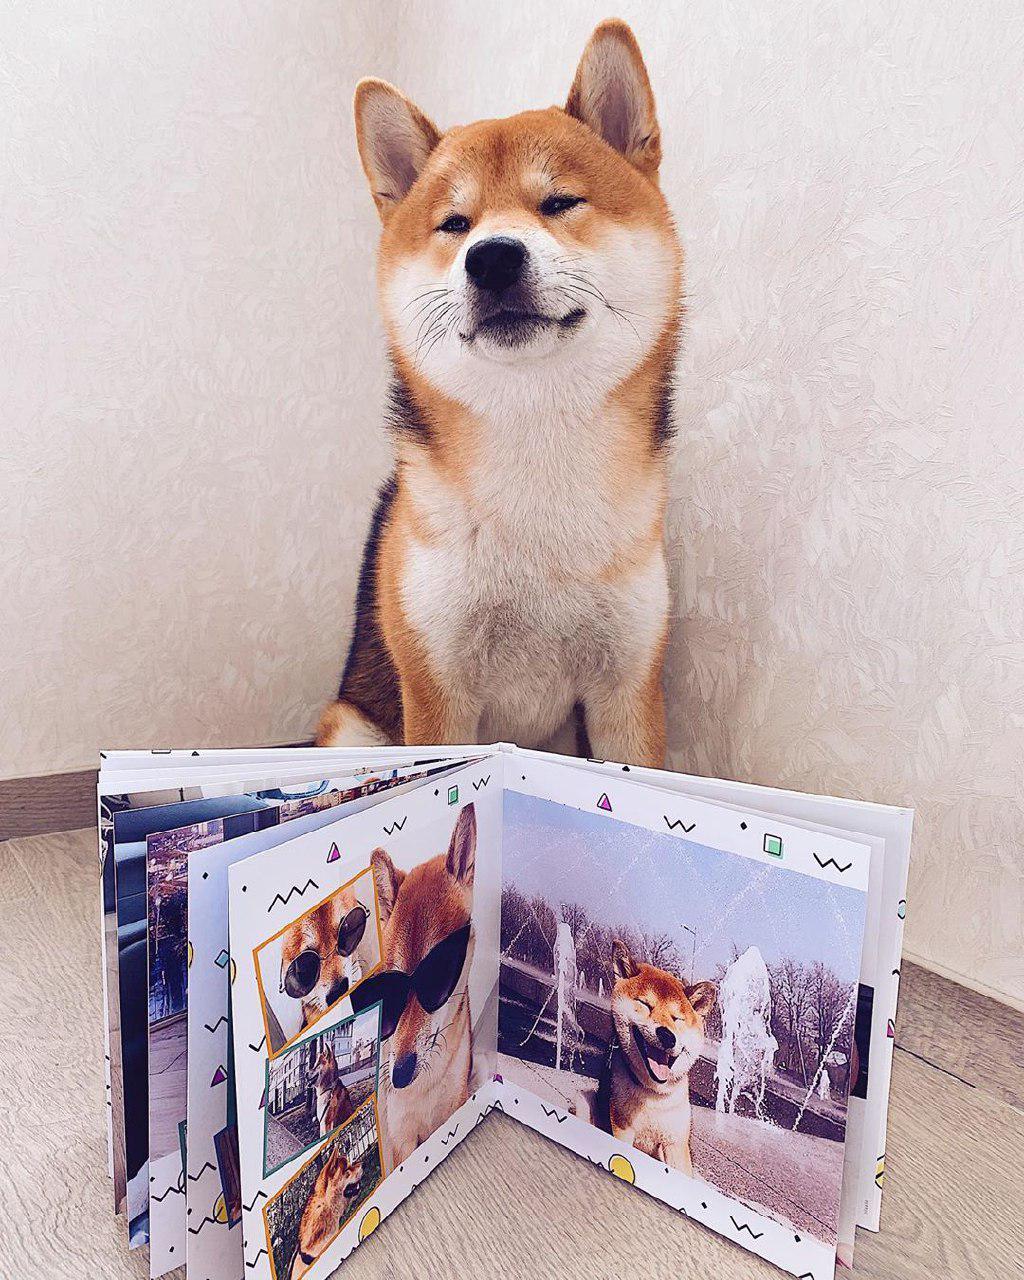 A Shiba Inu sitting in the corner with its scrapbook in front of him